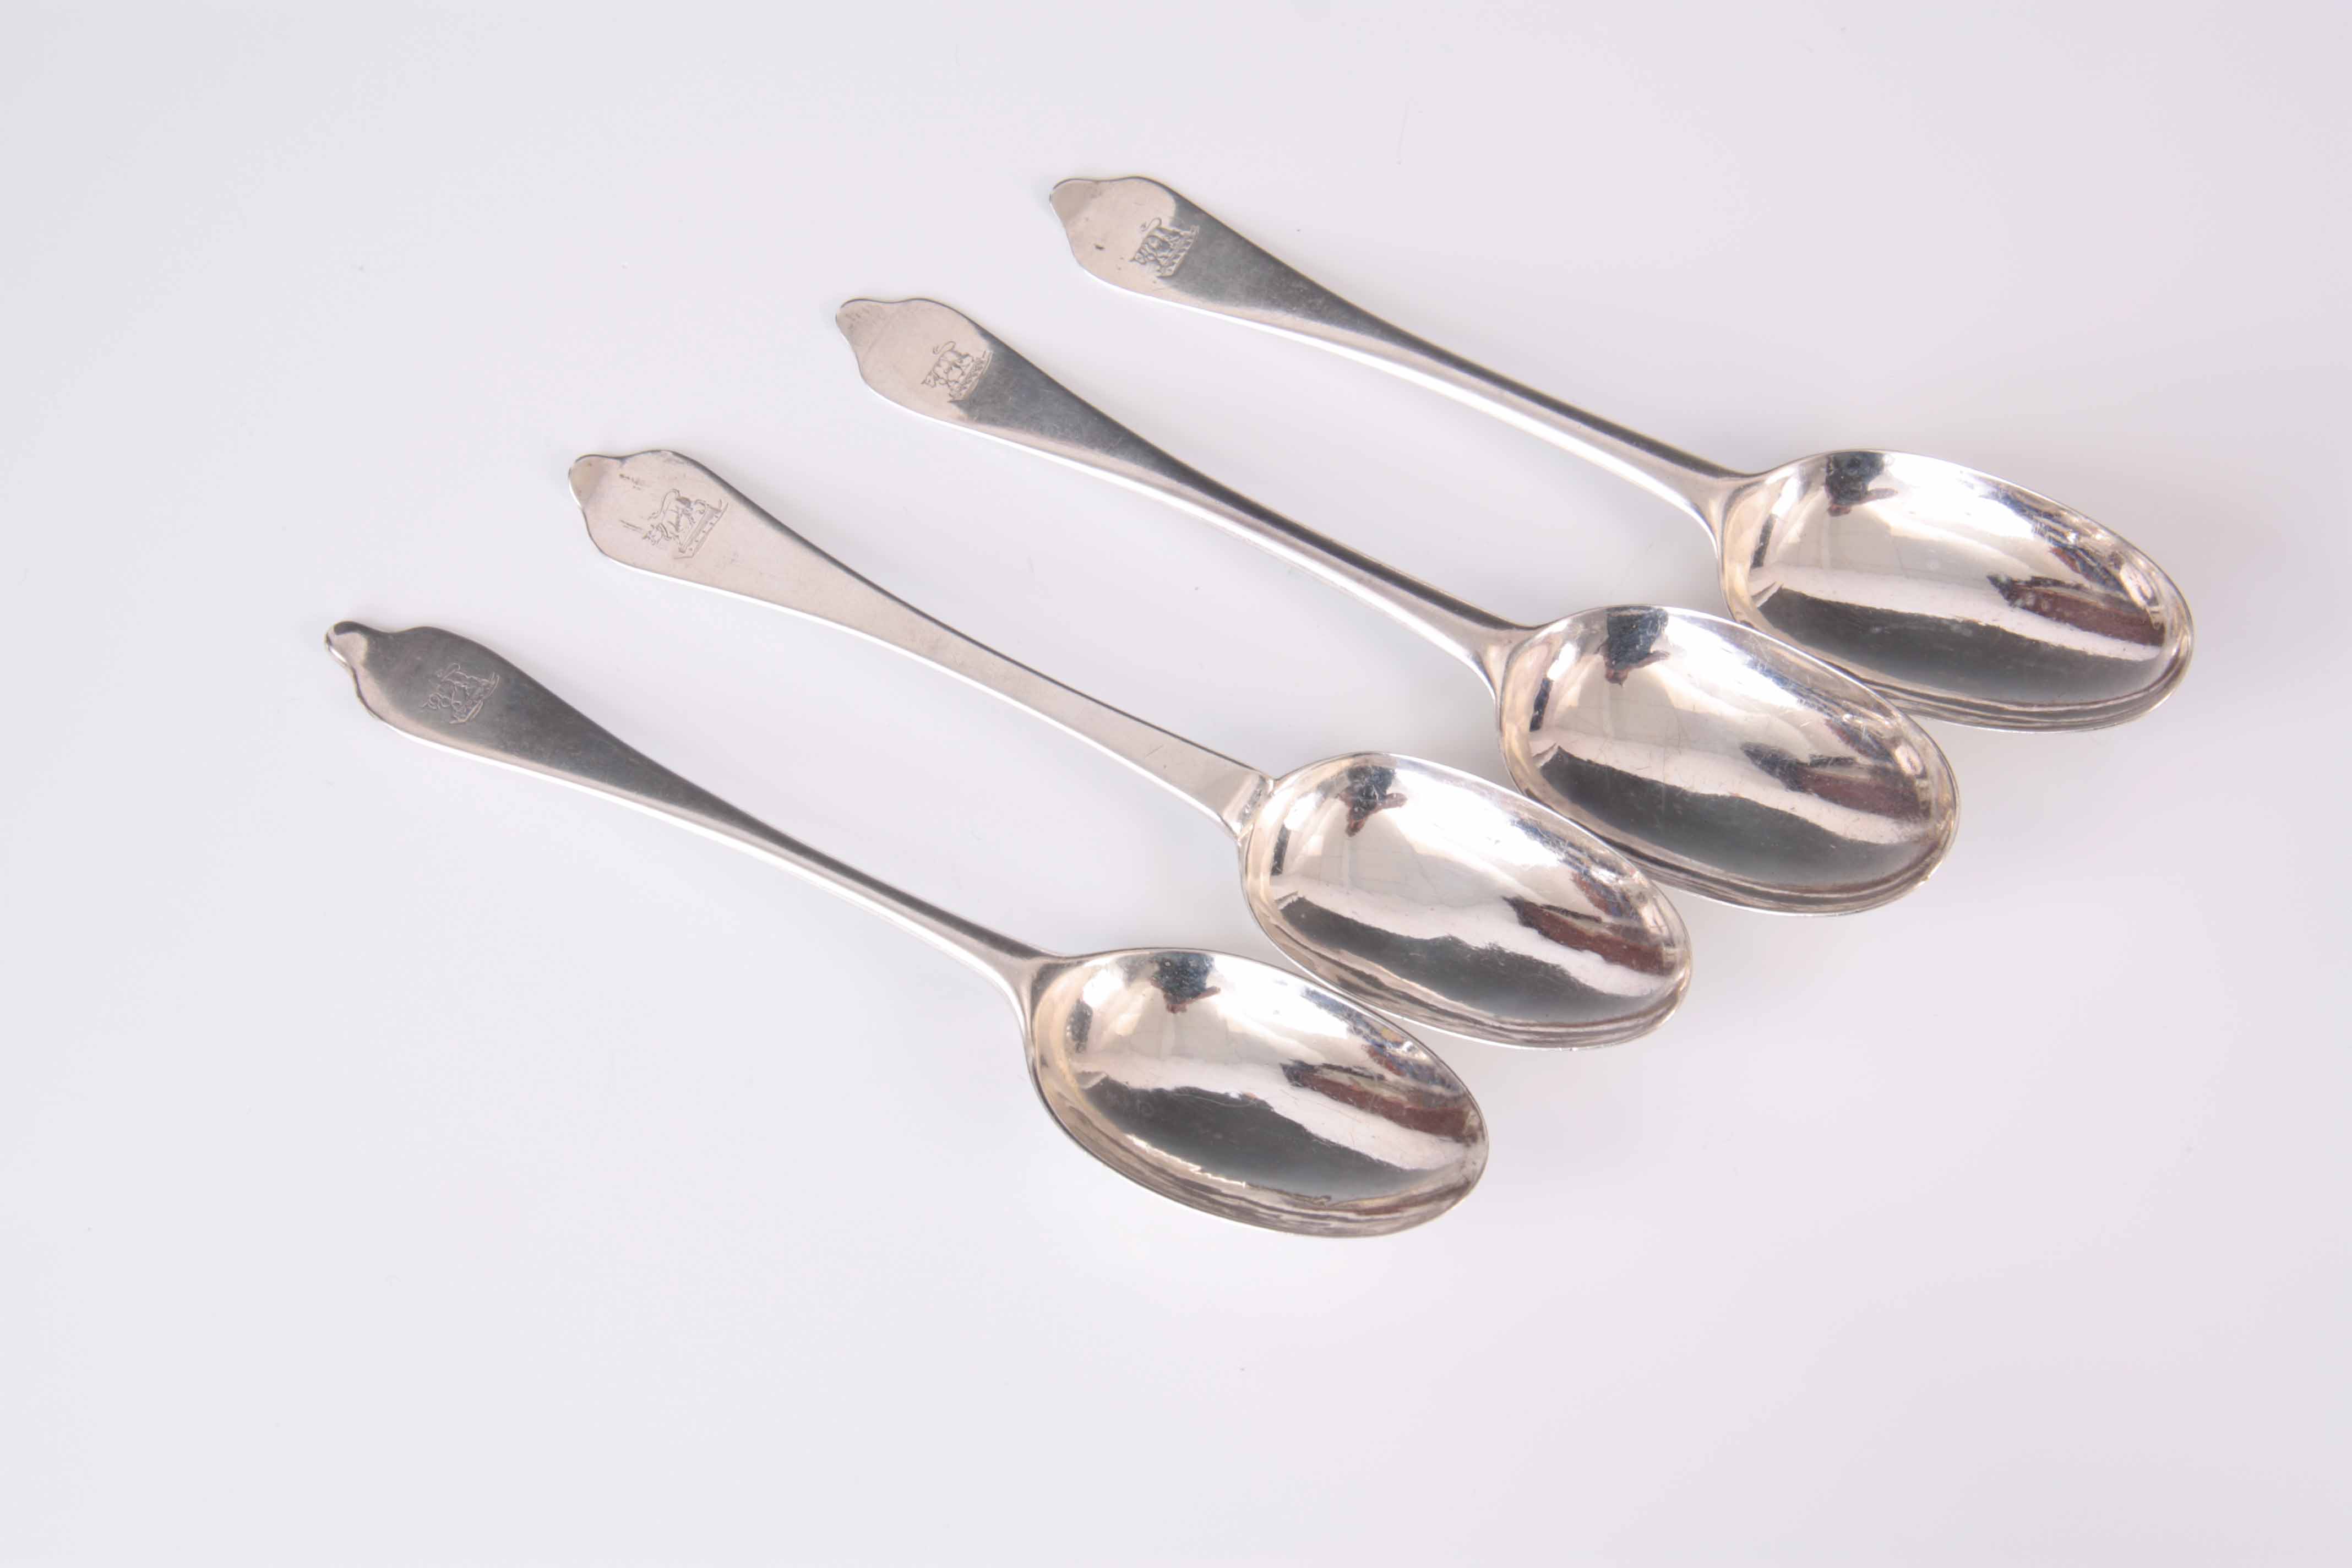 FOUR QUEEN ANN DOG NOSE SPOONS with engraved 'Bull' crests 19cm long, app. 6.5 troy oz. - Andrew